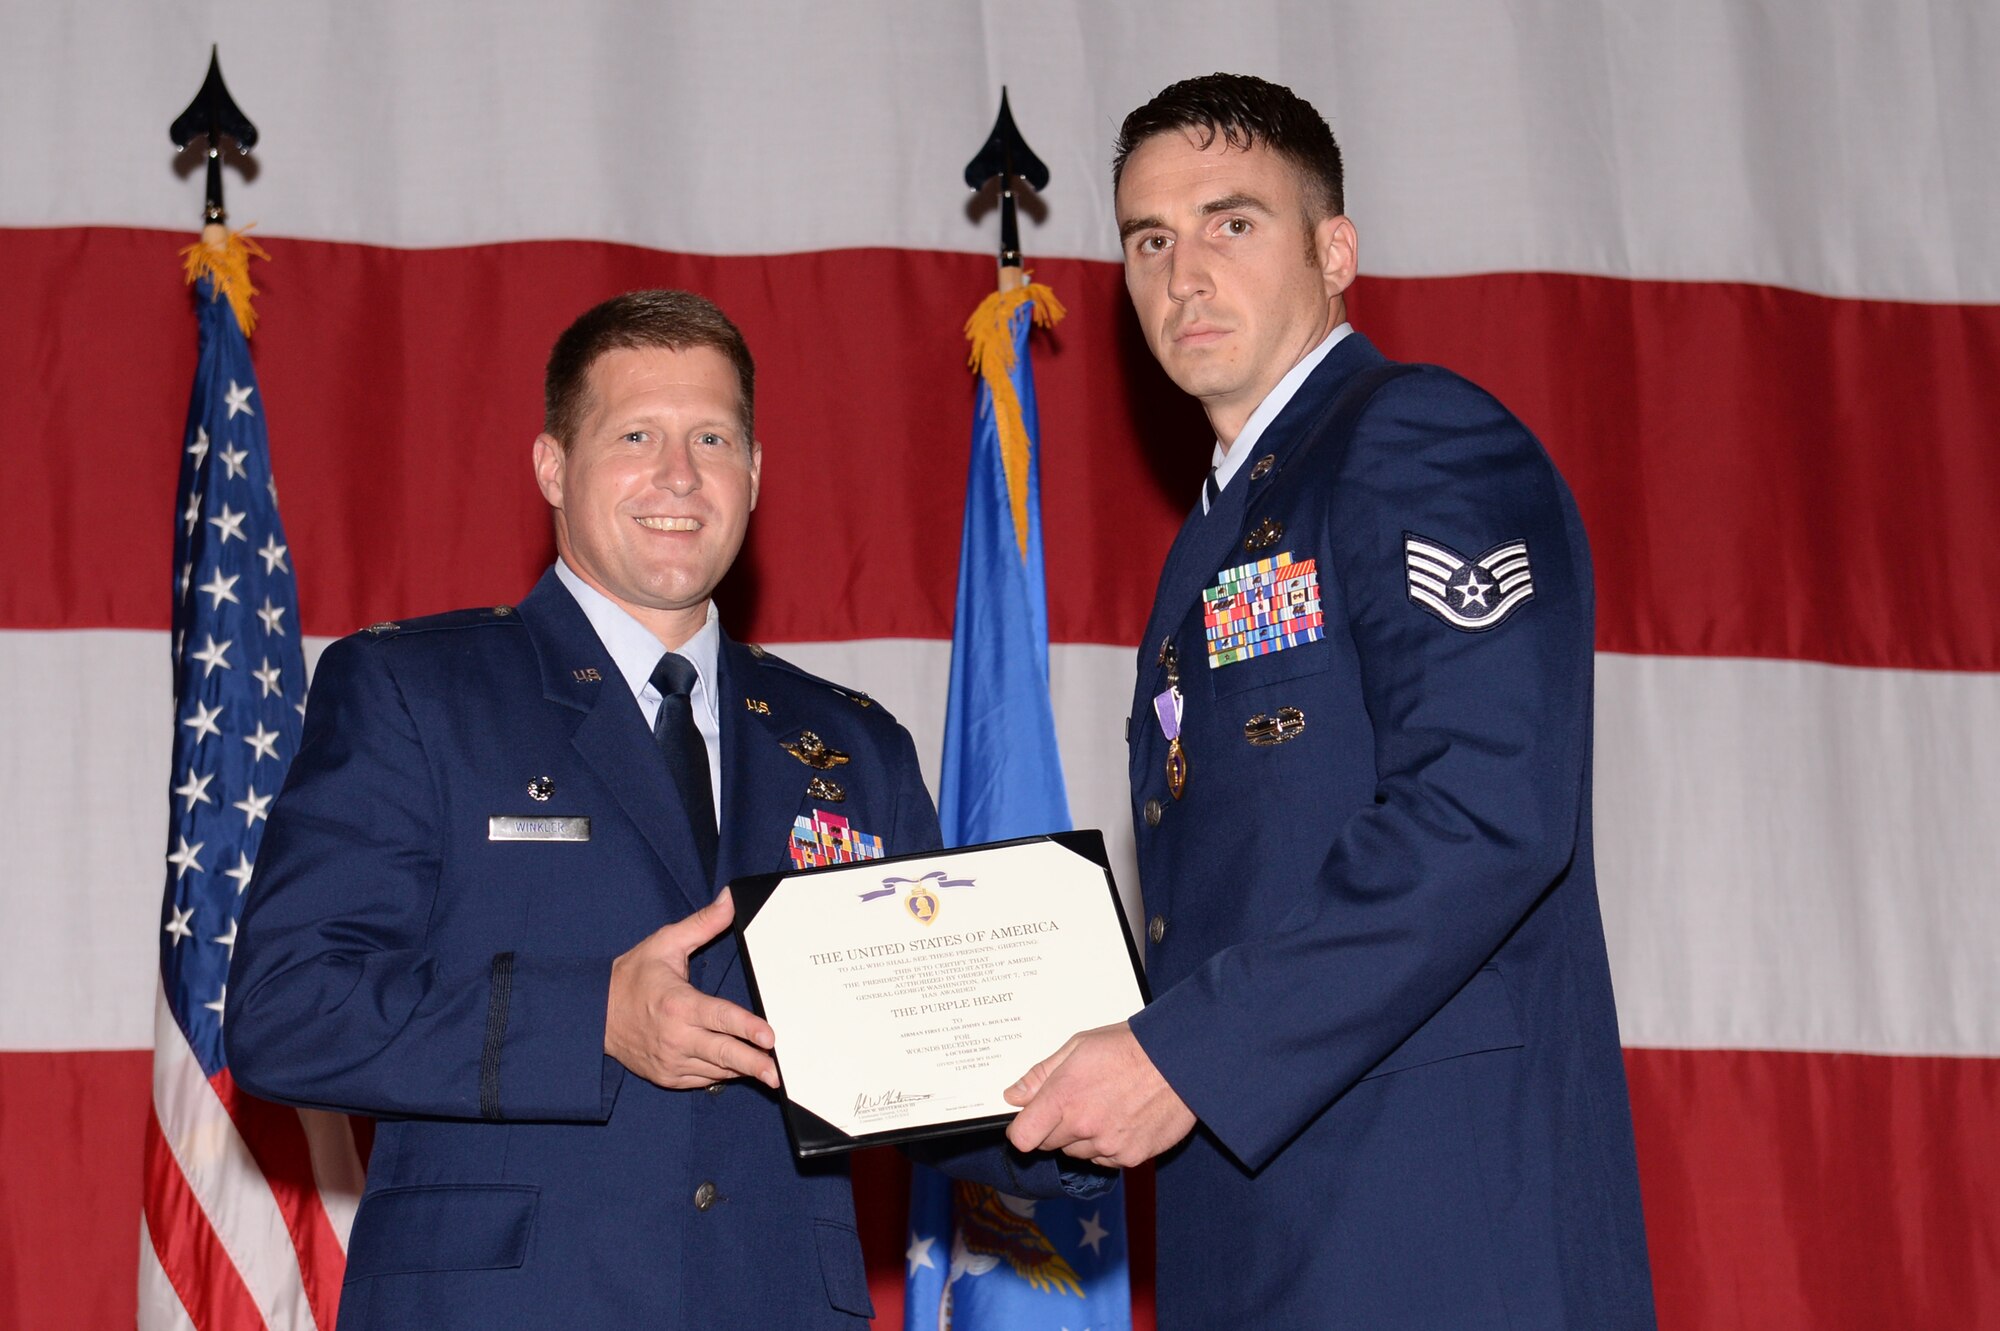 U.S. Air Force Staff Sgt. Jimmy Boulware, 354th Logistics Readiness Squadron vehicle operator, receives a Purple Heart decoration from Col. Michael Winkler, 354th Fighter Wing commander, during a promotion recognition ceremony at the base theater July 31, 2014, Eielson Air Force Base, Alaska.  Boulware sustained injuries from an improvised explosive device during a 2005 deployment to Iraq. (U.S. Air Force photo by Senior Airman Peter Reft/Released)  